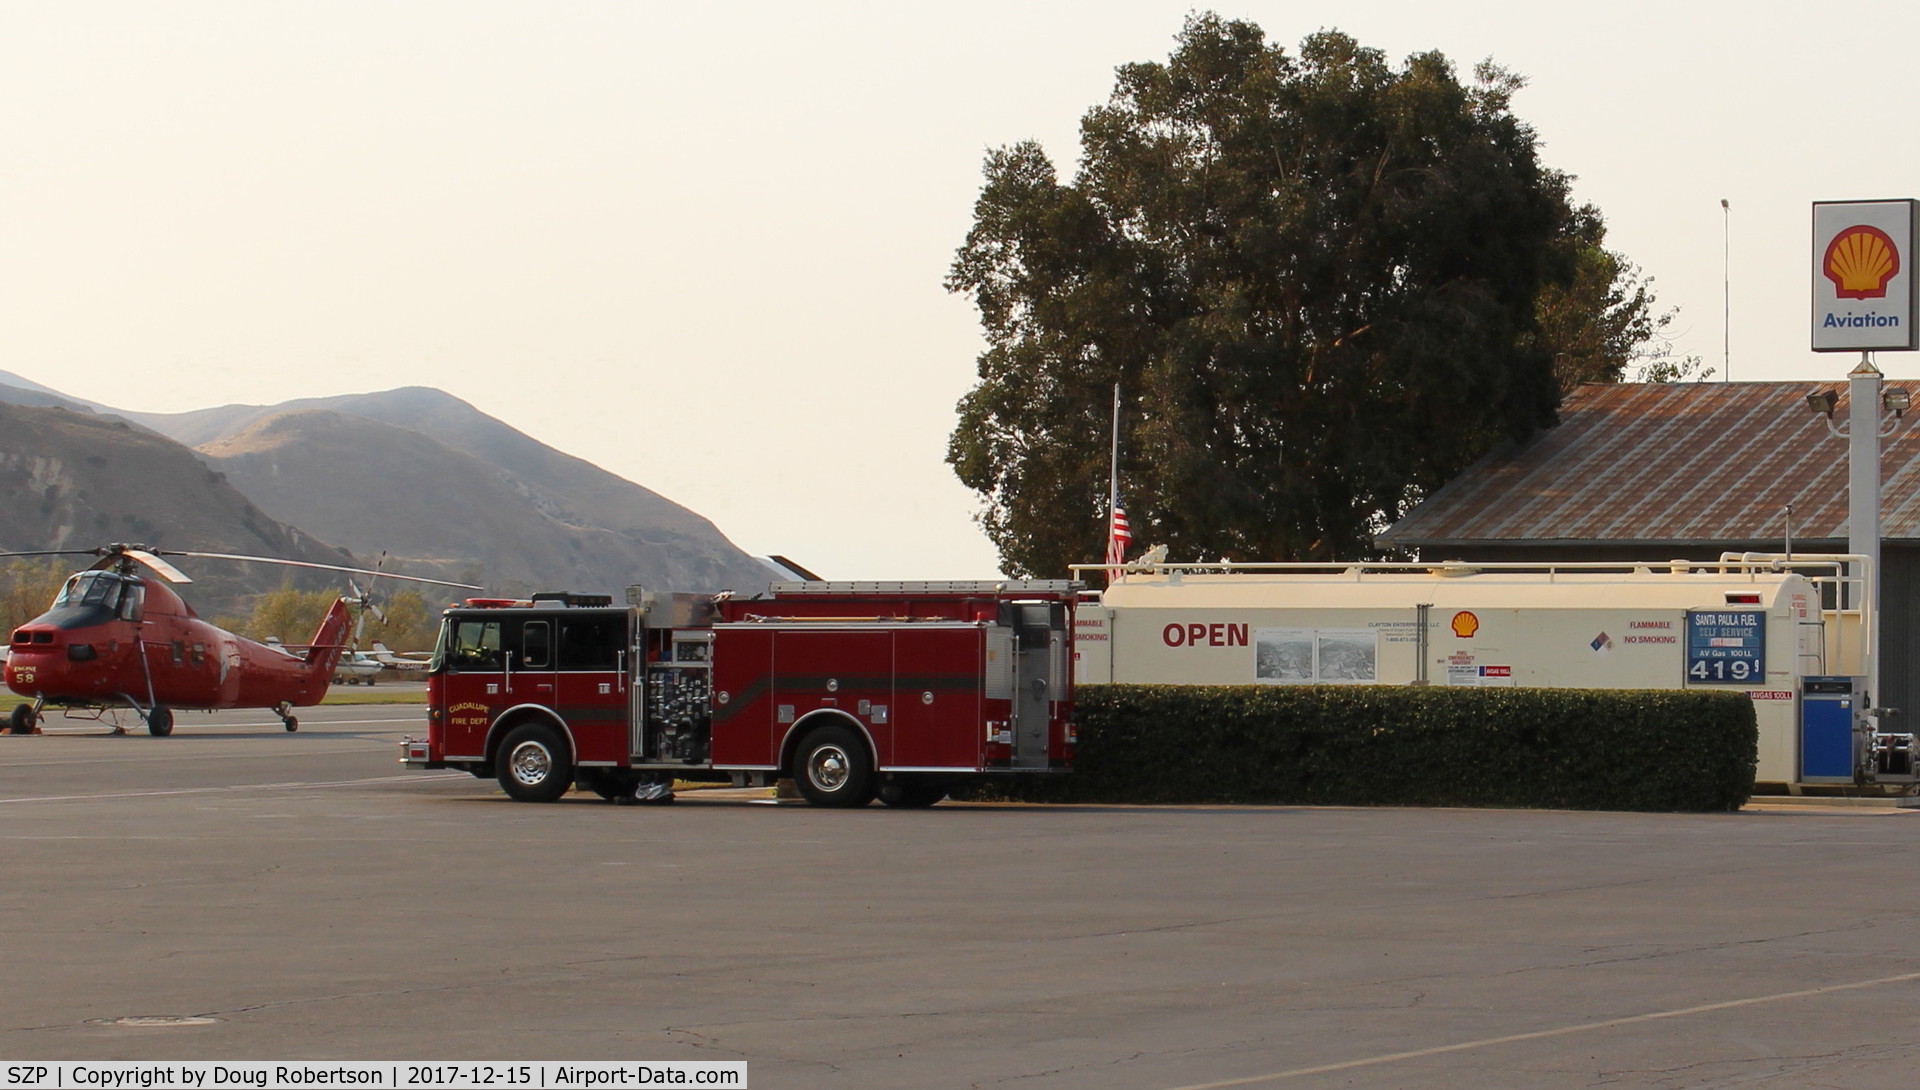 Santa Paula Airport (SZP) - SZP Self-Serve SHELL 100LL Self-Serve Fuel Dock, no price change. Field, runway closed to General Aviation. SZP is FireBase for Thomas Fire which started locally 4 Dec.